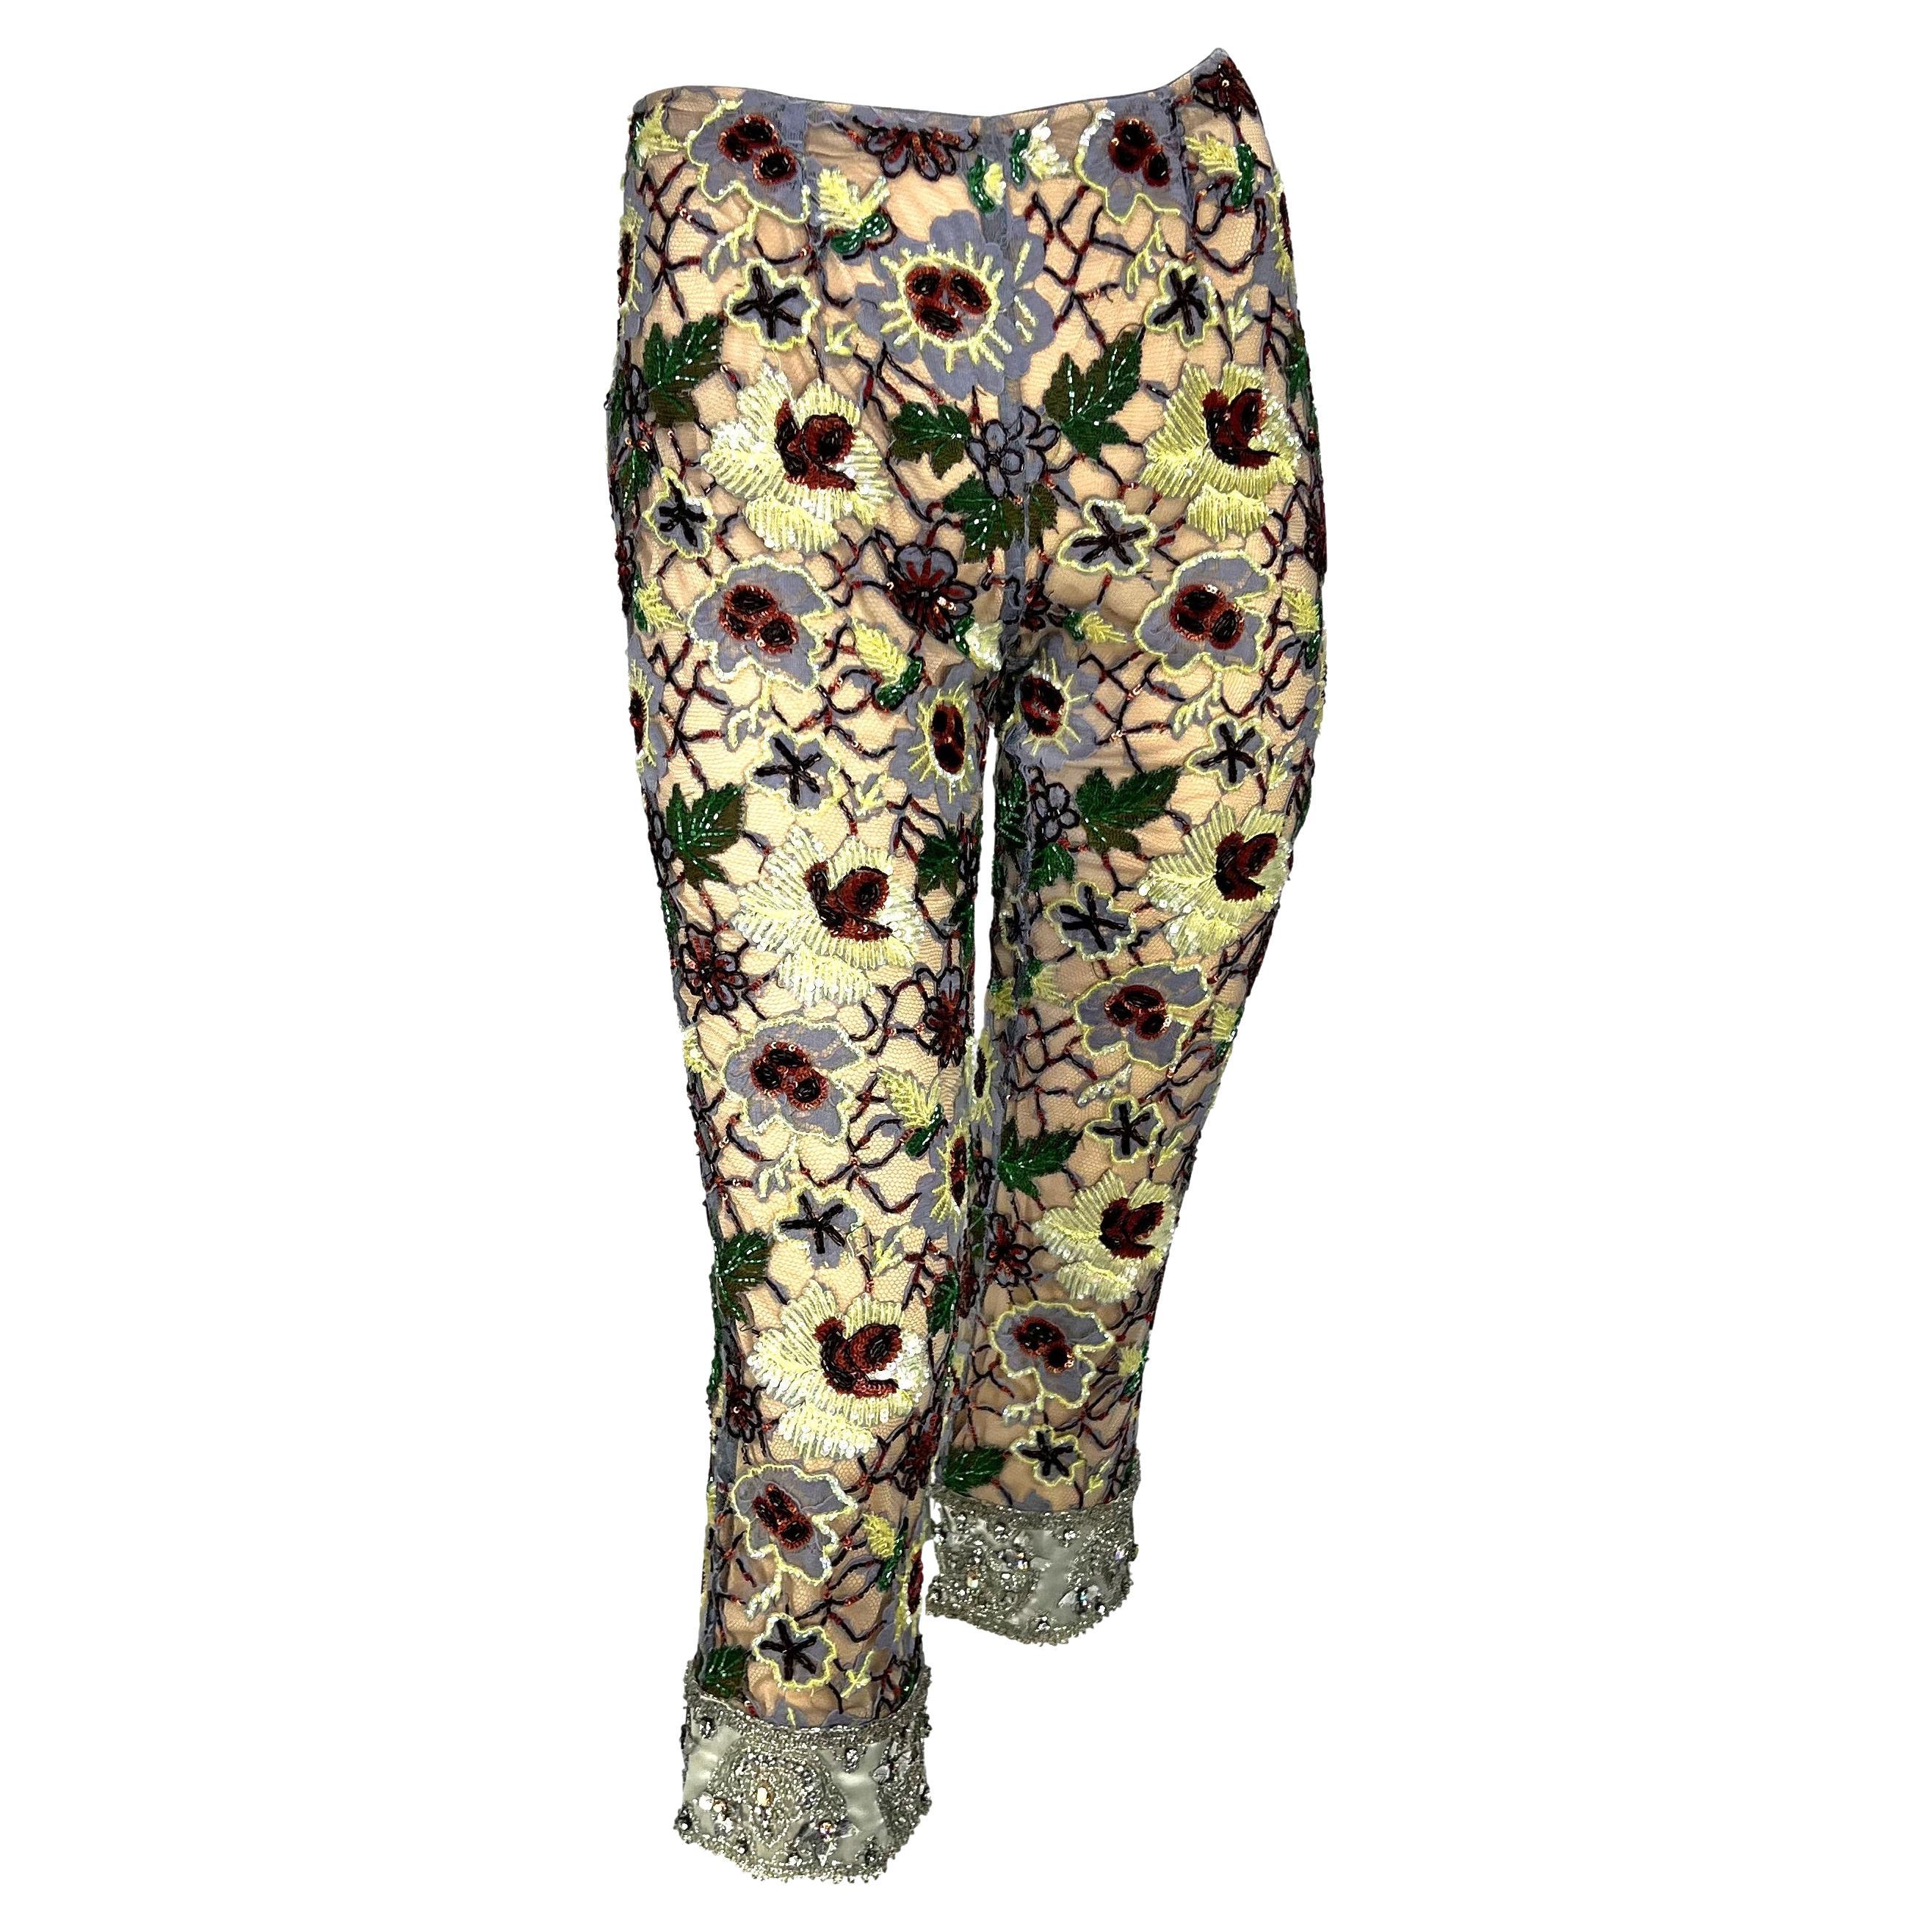 F/W 1999 Dolce & Gabbana Runway Floral Beaded Rhinestone Cropped Pants NWT For Sale 2